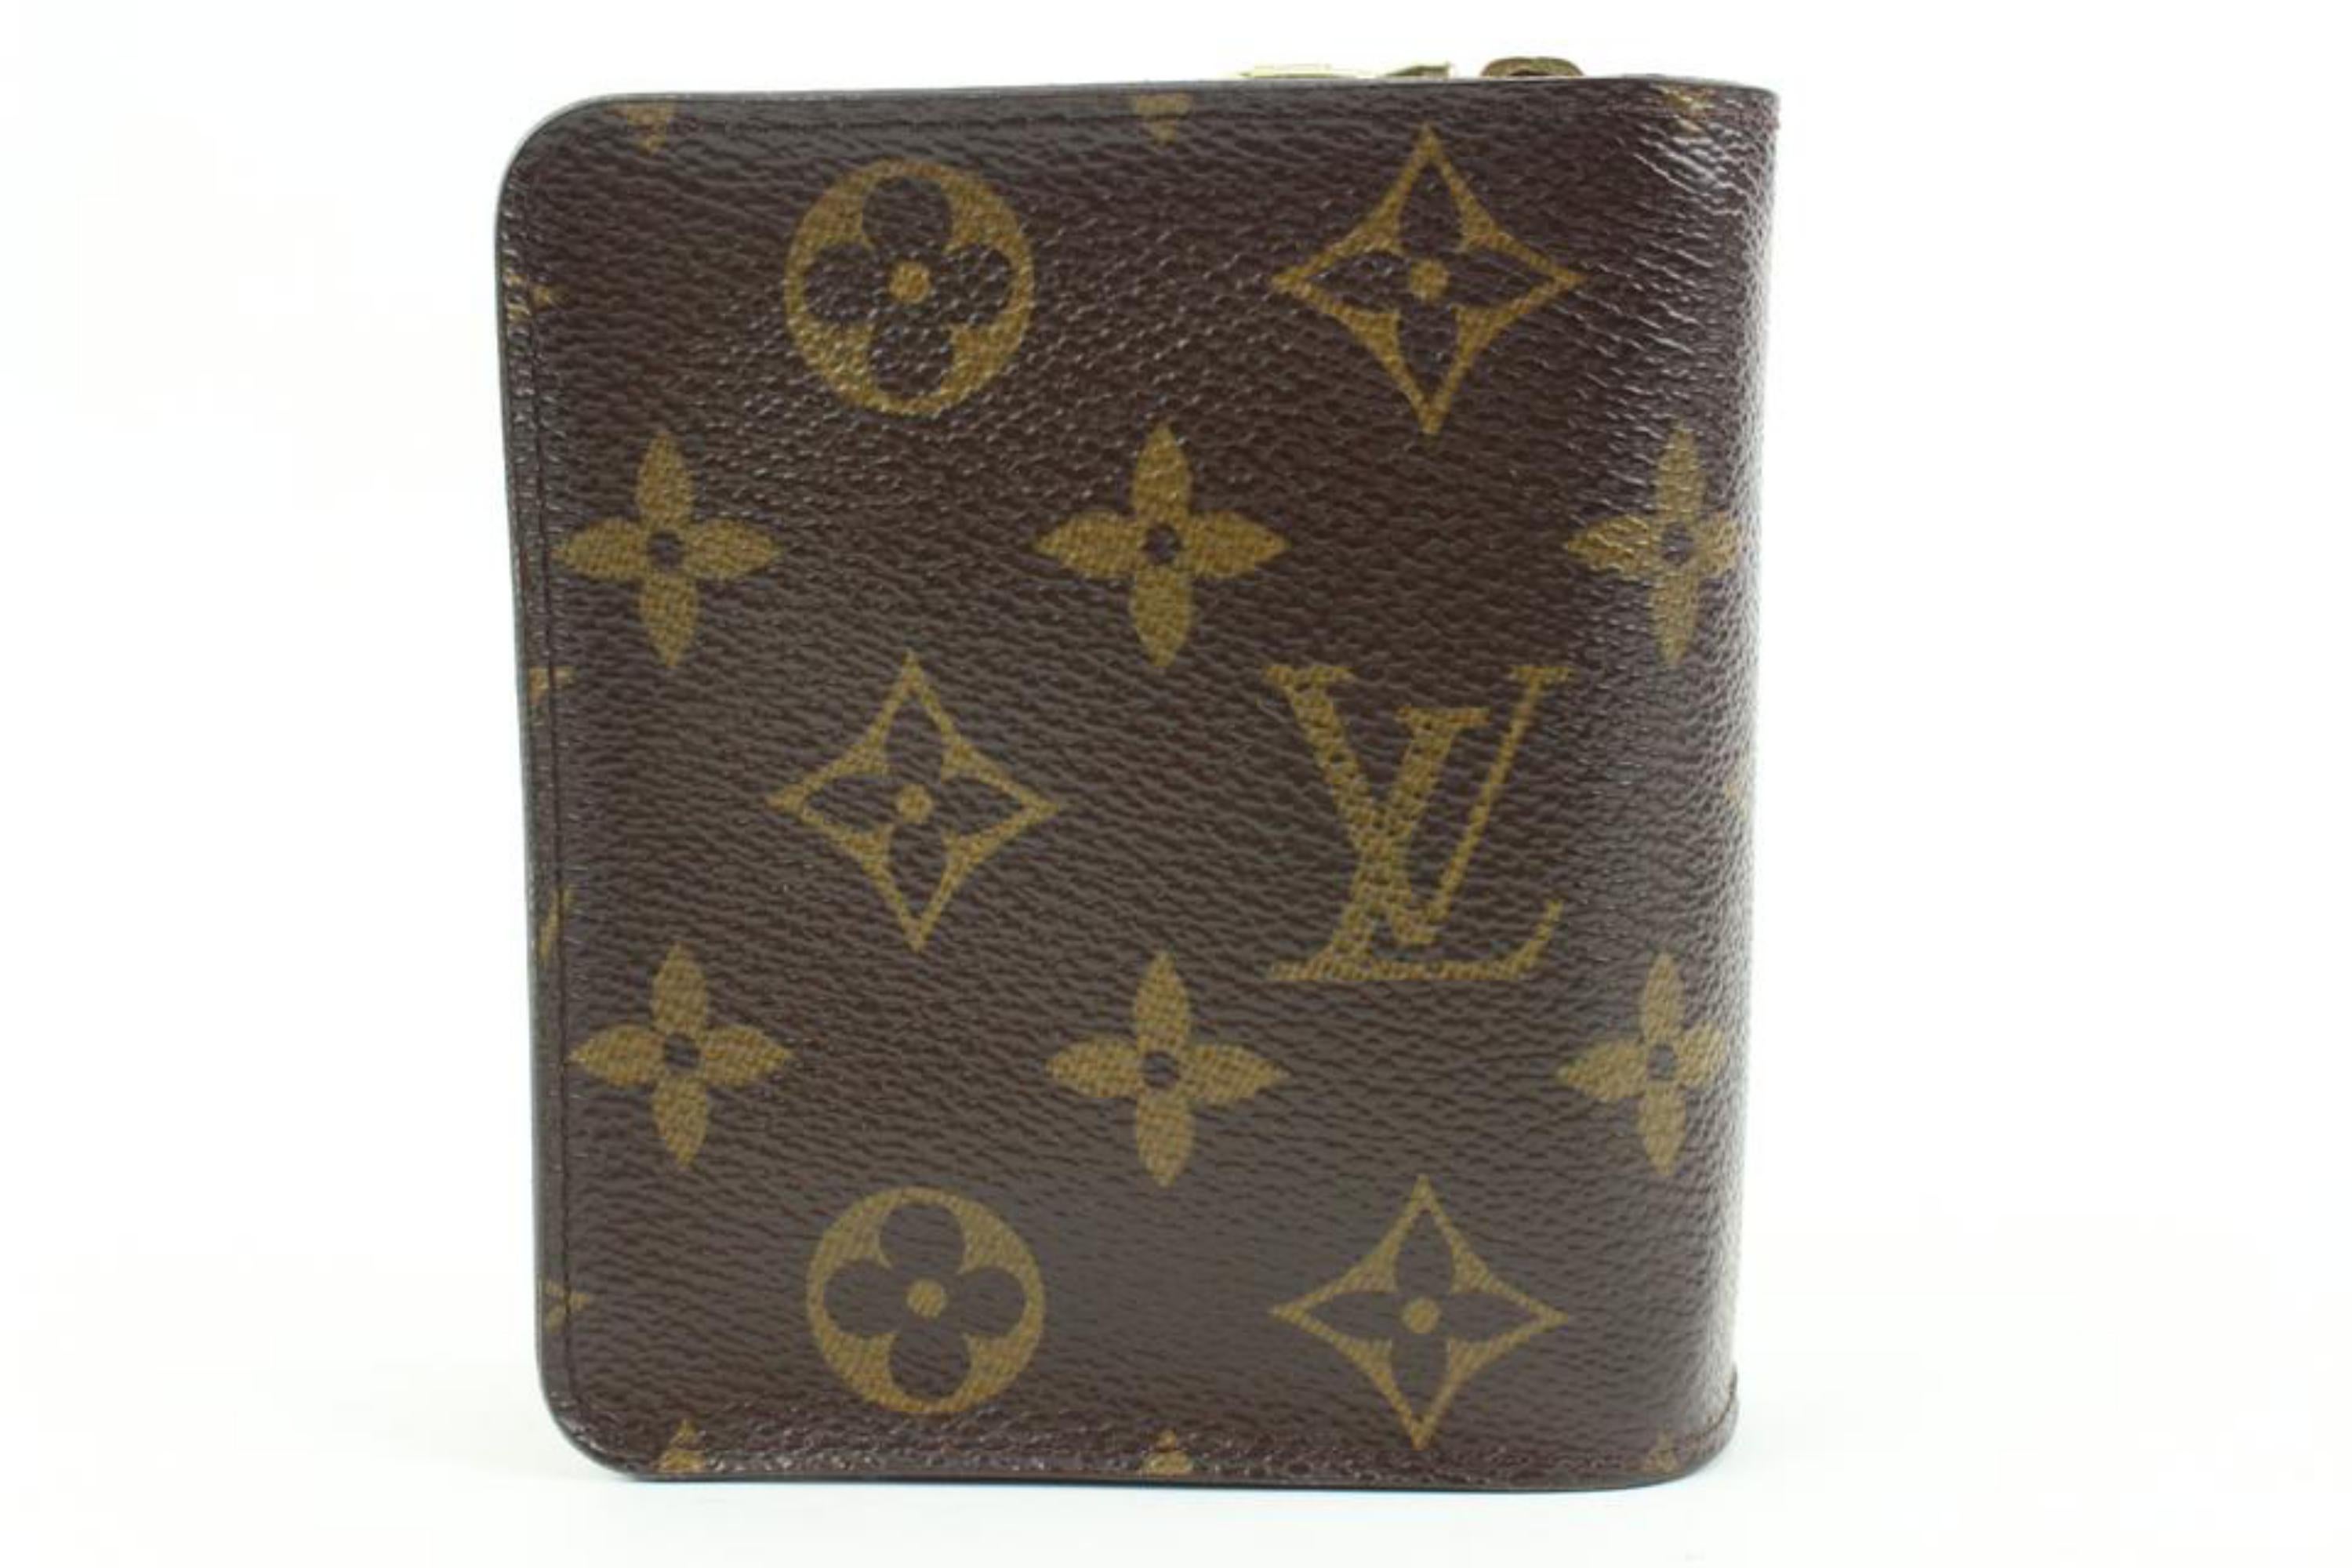 Louis Vuitton Monogram Compact Wallet Zippy Snap Zip 91lv225s In Fair Condition For Sale In Dix hills, NY